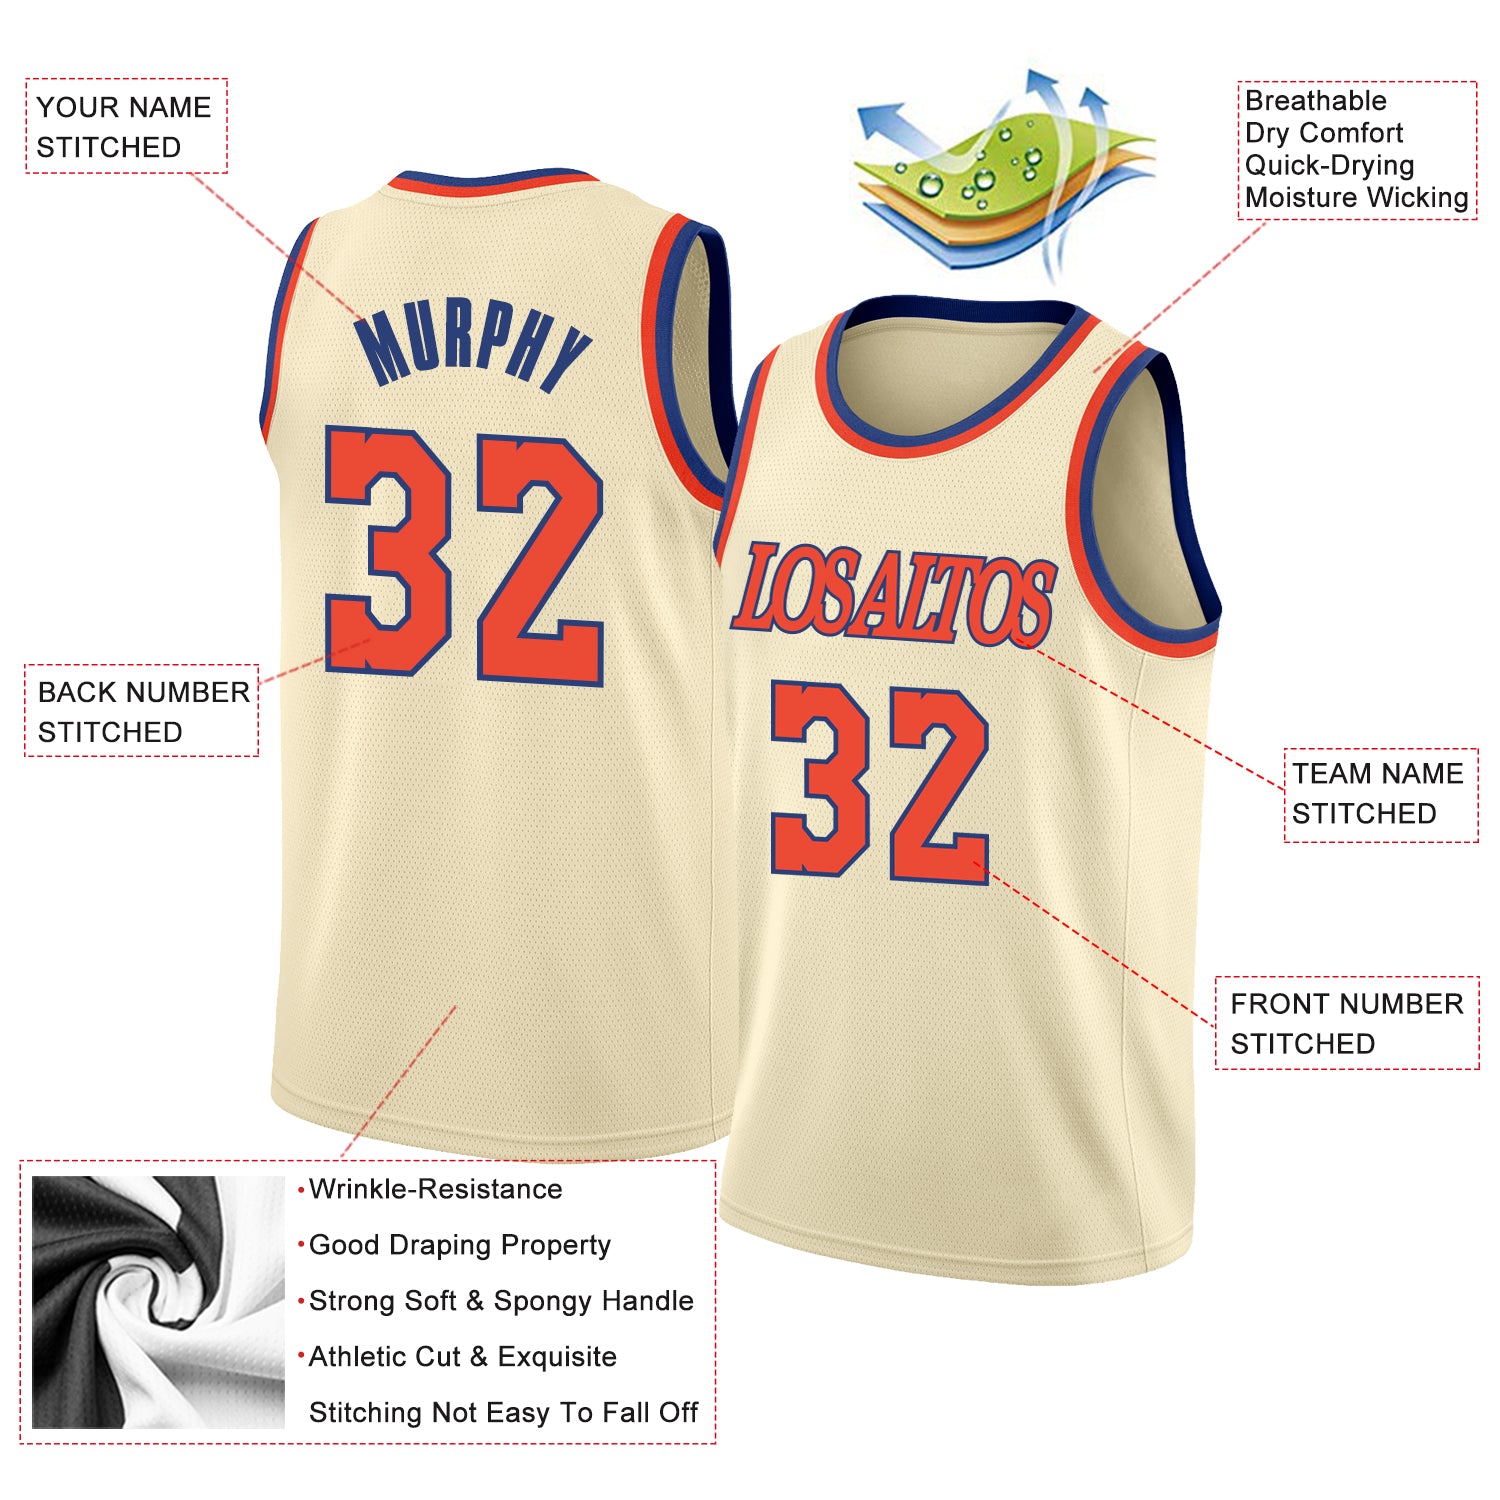 FANSIDEA Custom Basketball Jersey Yellow Brown-Cream Round Neck Sublimation Basketball Suit Jersey Men's Size:L